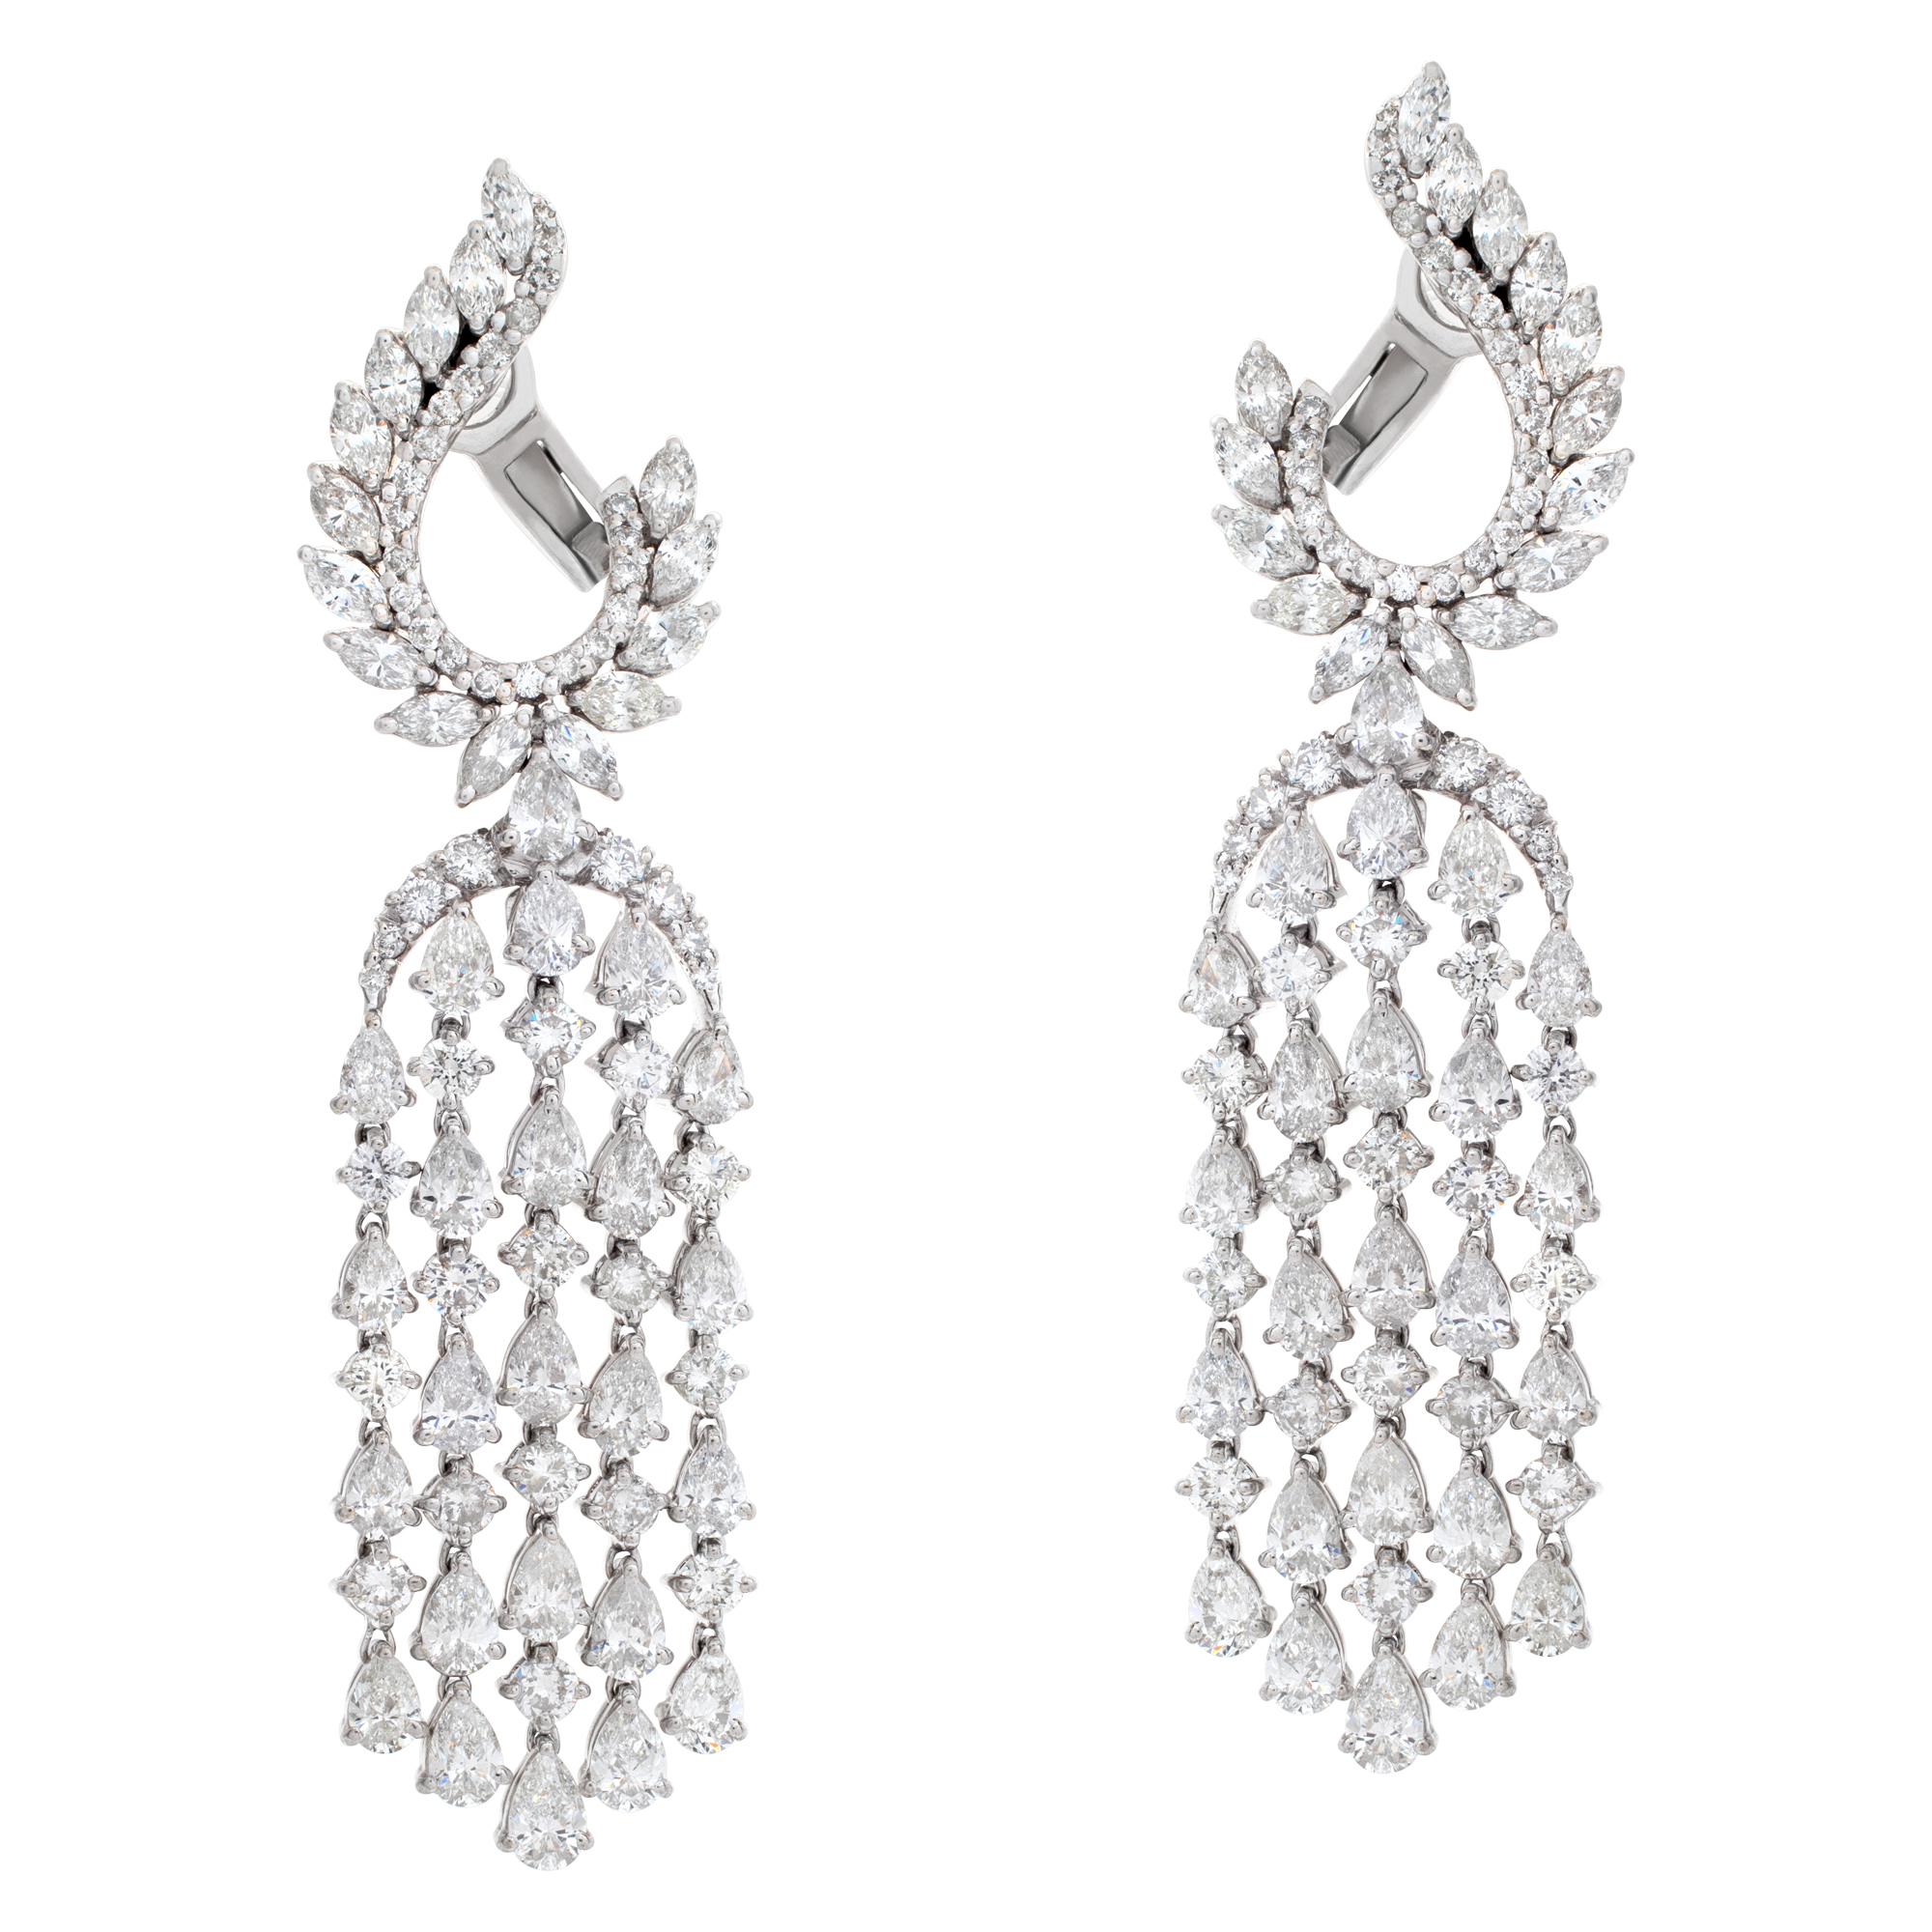 Stunning diamond chandelier earrings set in 18k white gold with approximately 13.40 carat marquise, princess, pear and round brilliant diamond cut shape